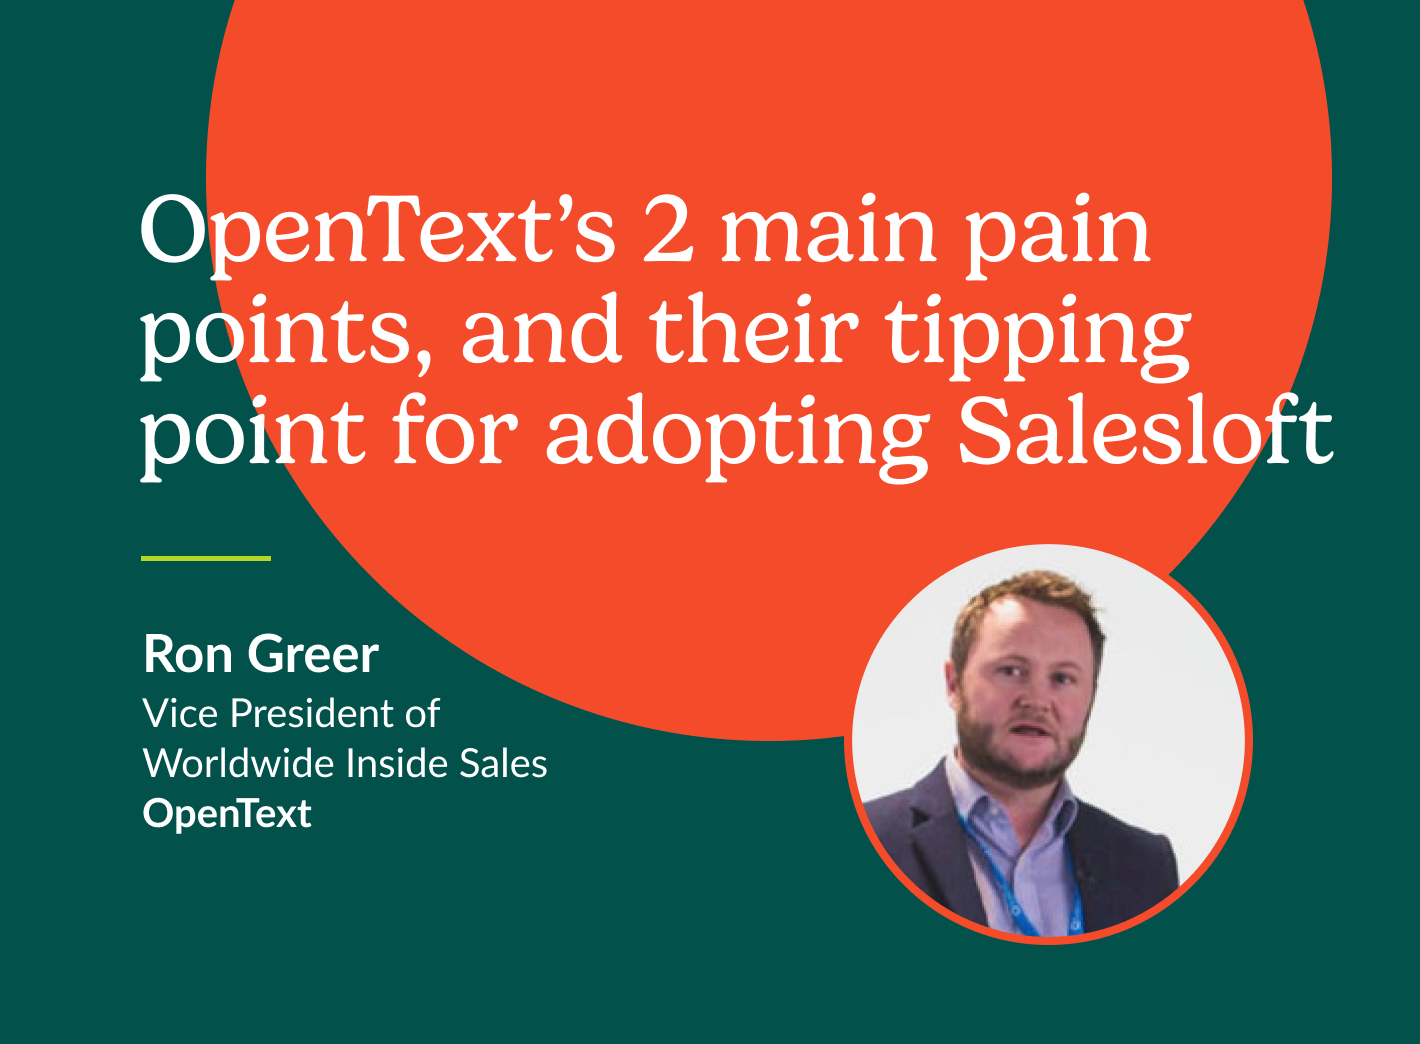 OpenText's 2 main pain points and their tipping point for adopting Salesloft